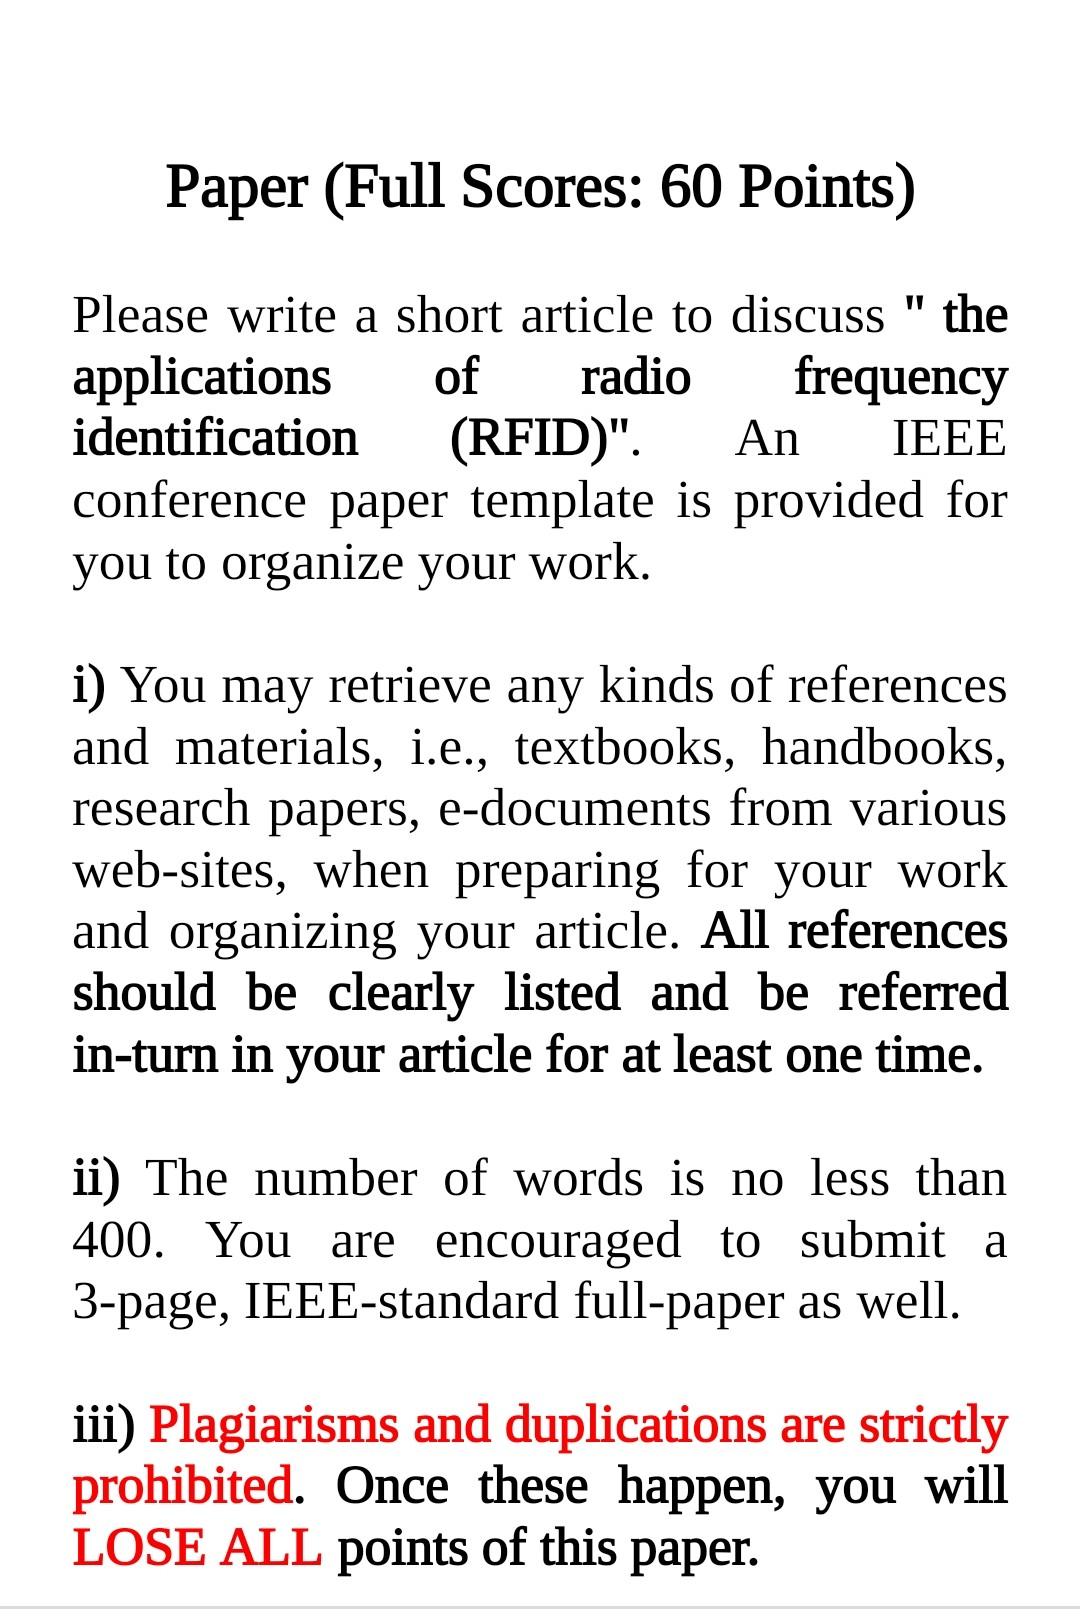 How to Write a Conference Paper